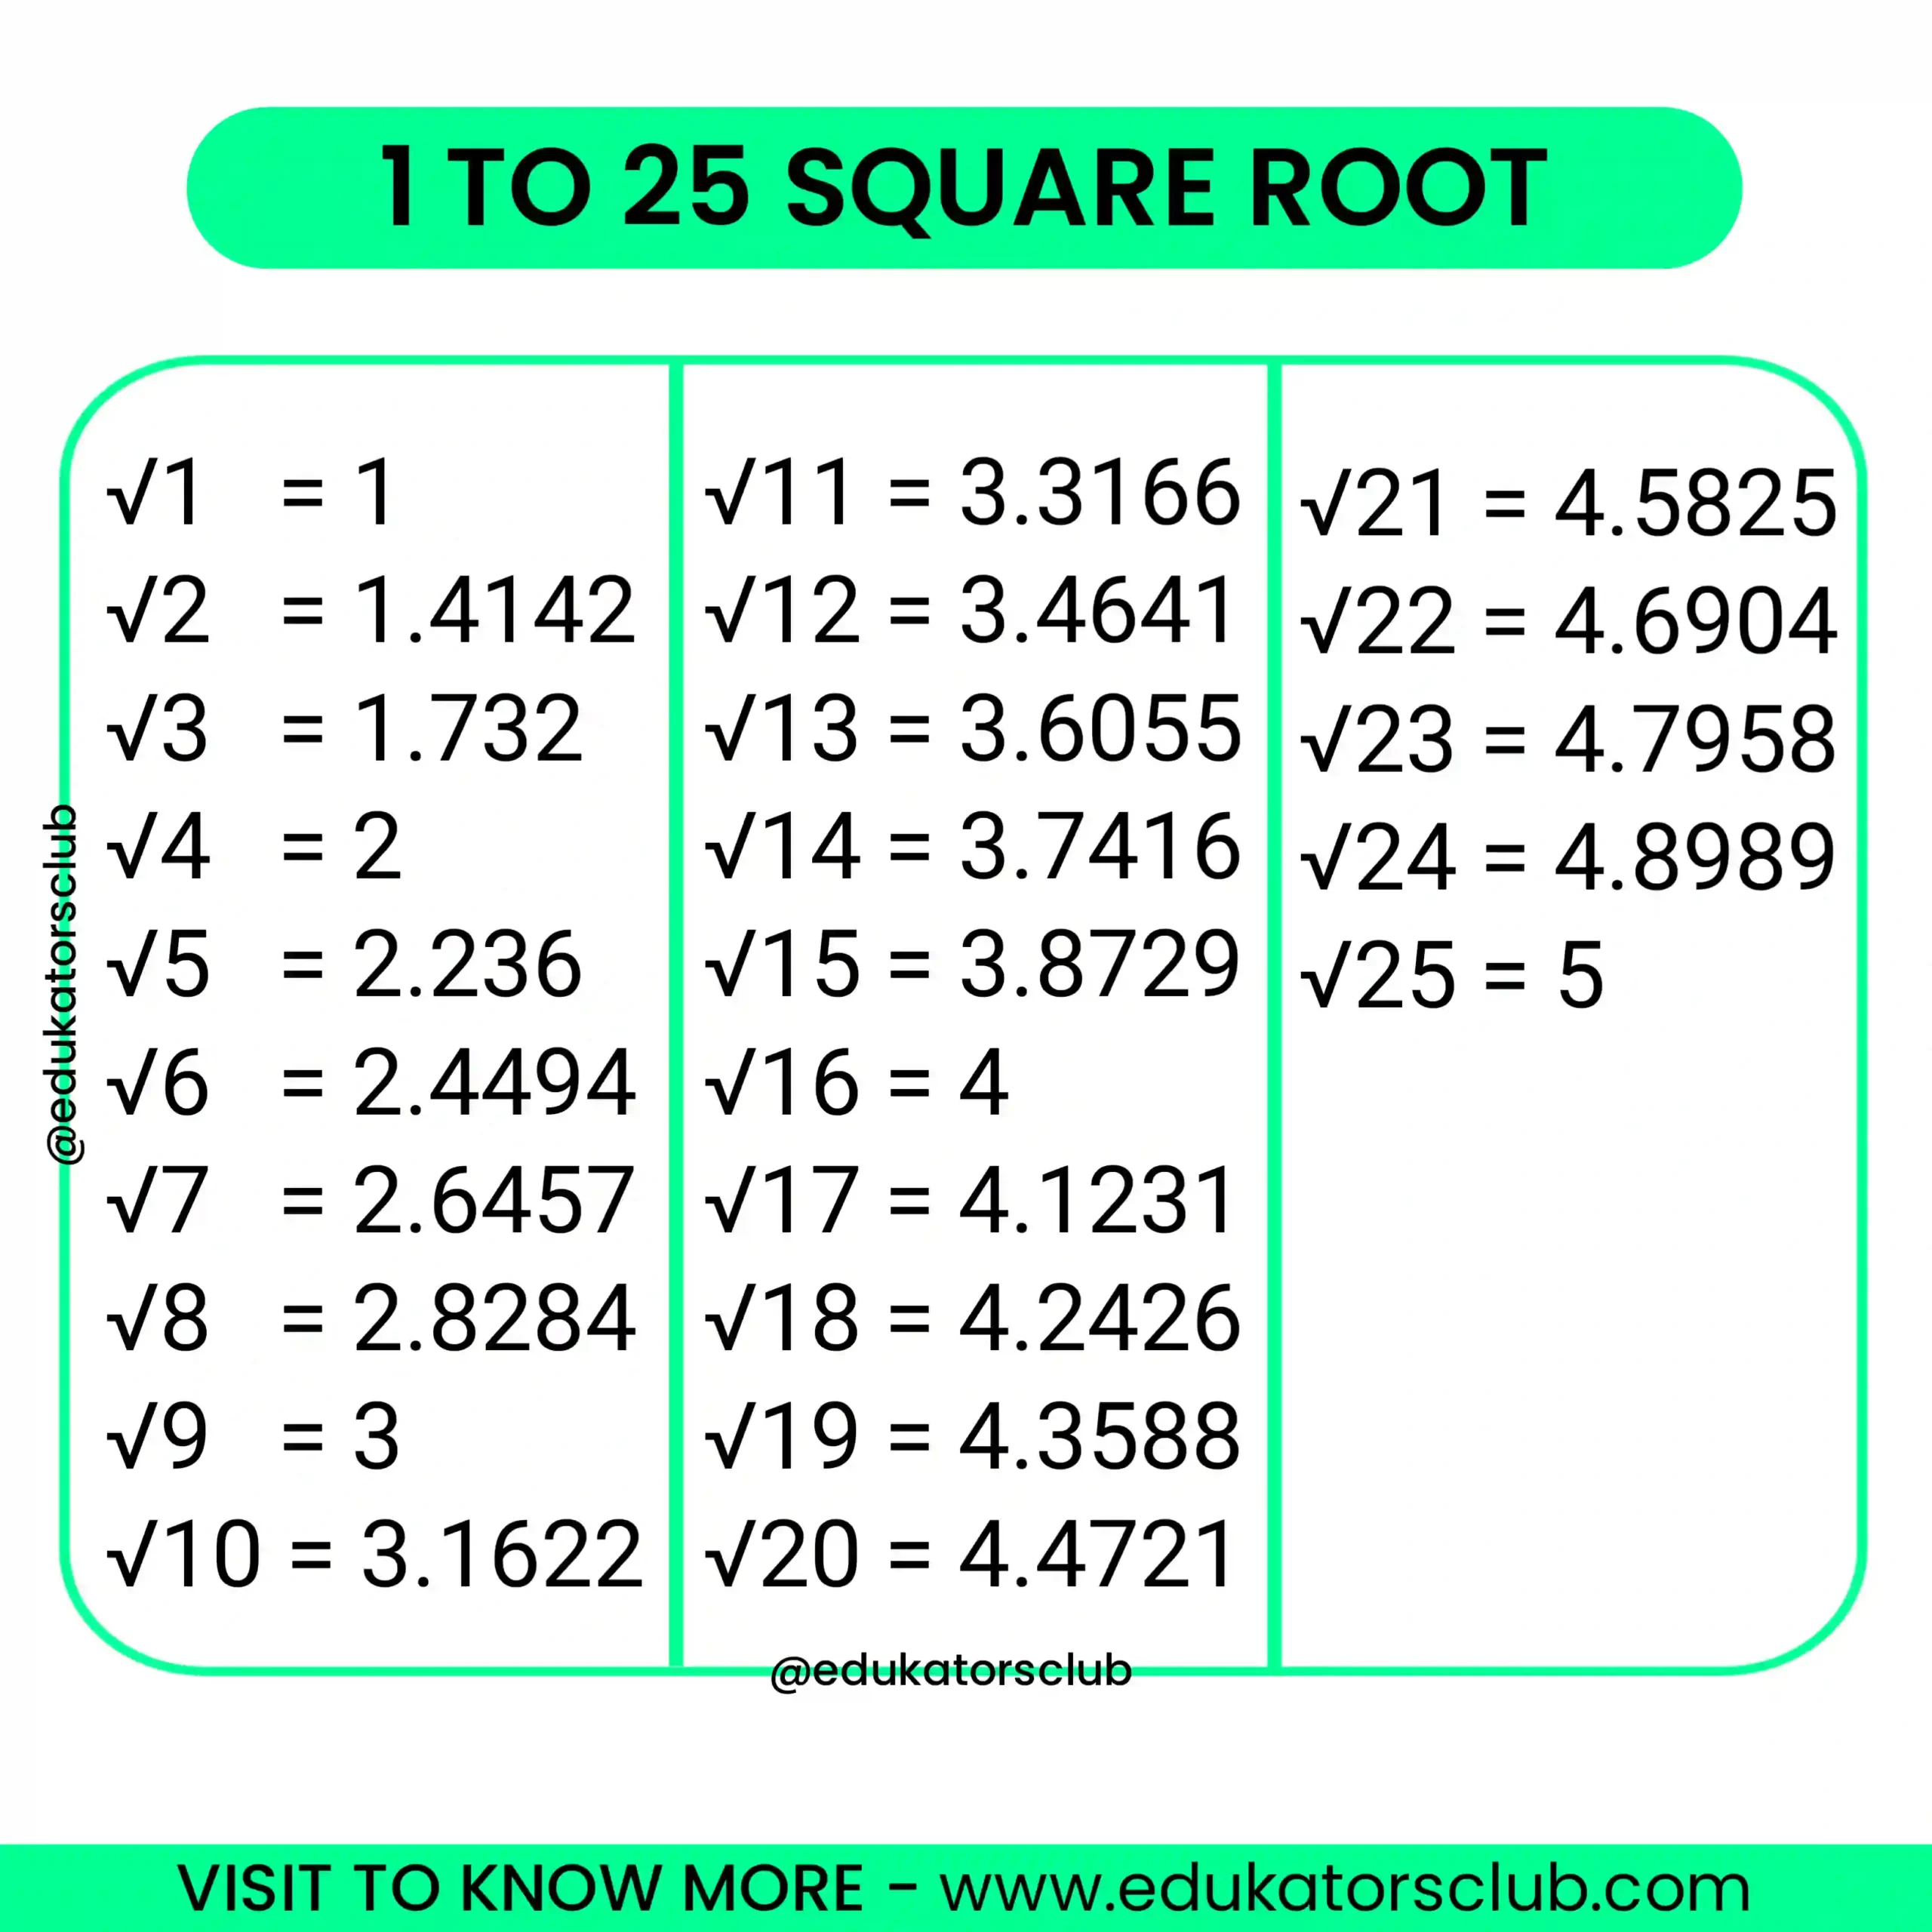 1 To 25 Square Root Value Pdf Download Square Roots From 1 To 25